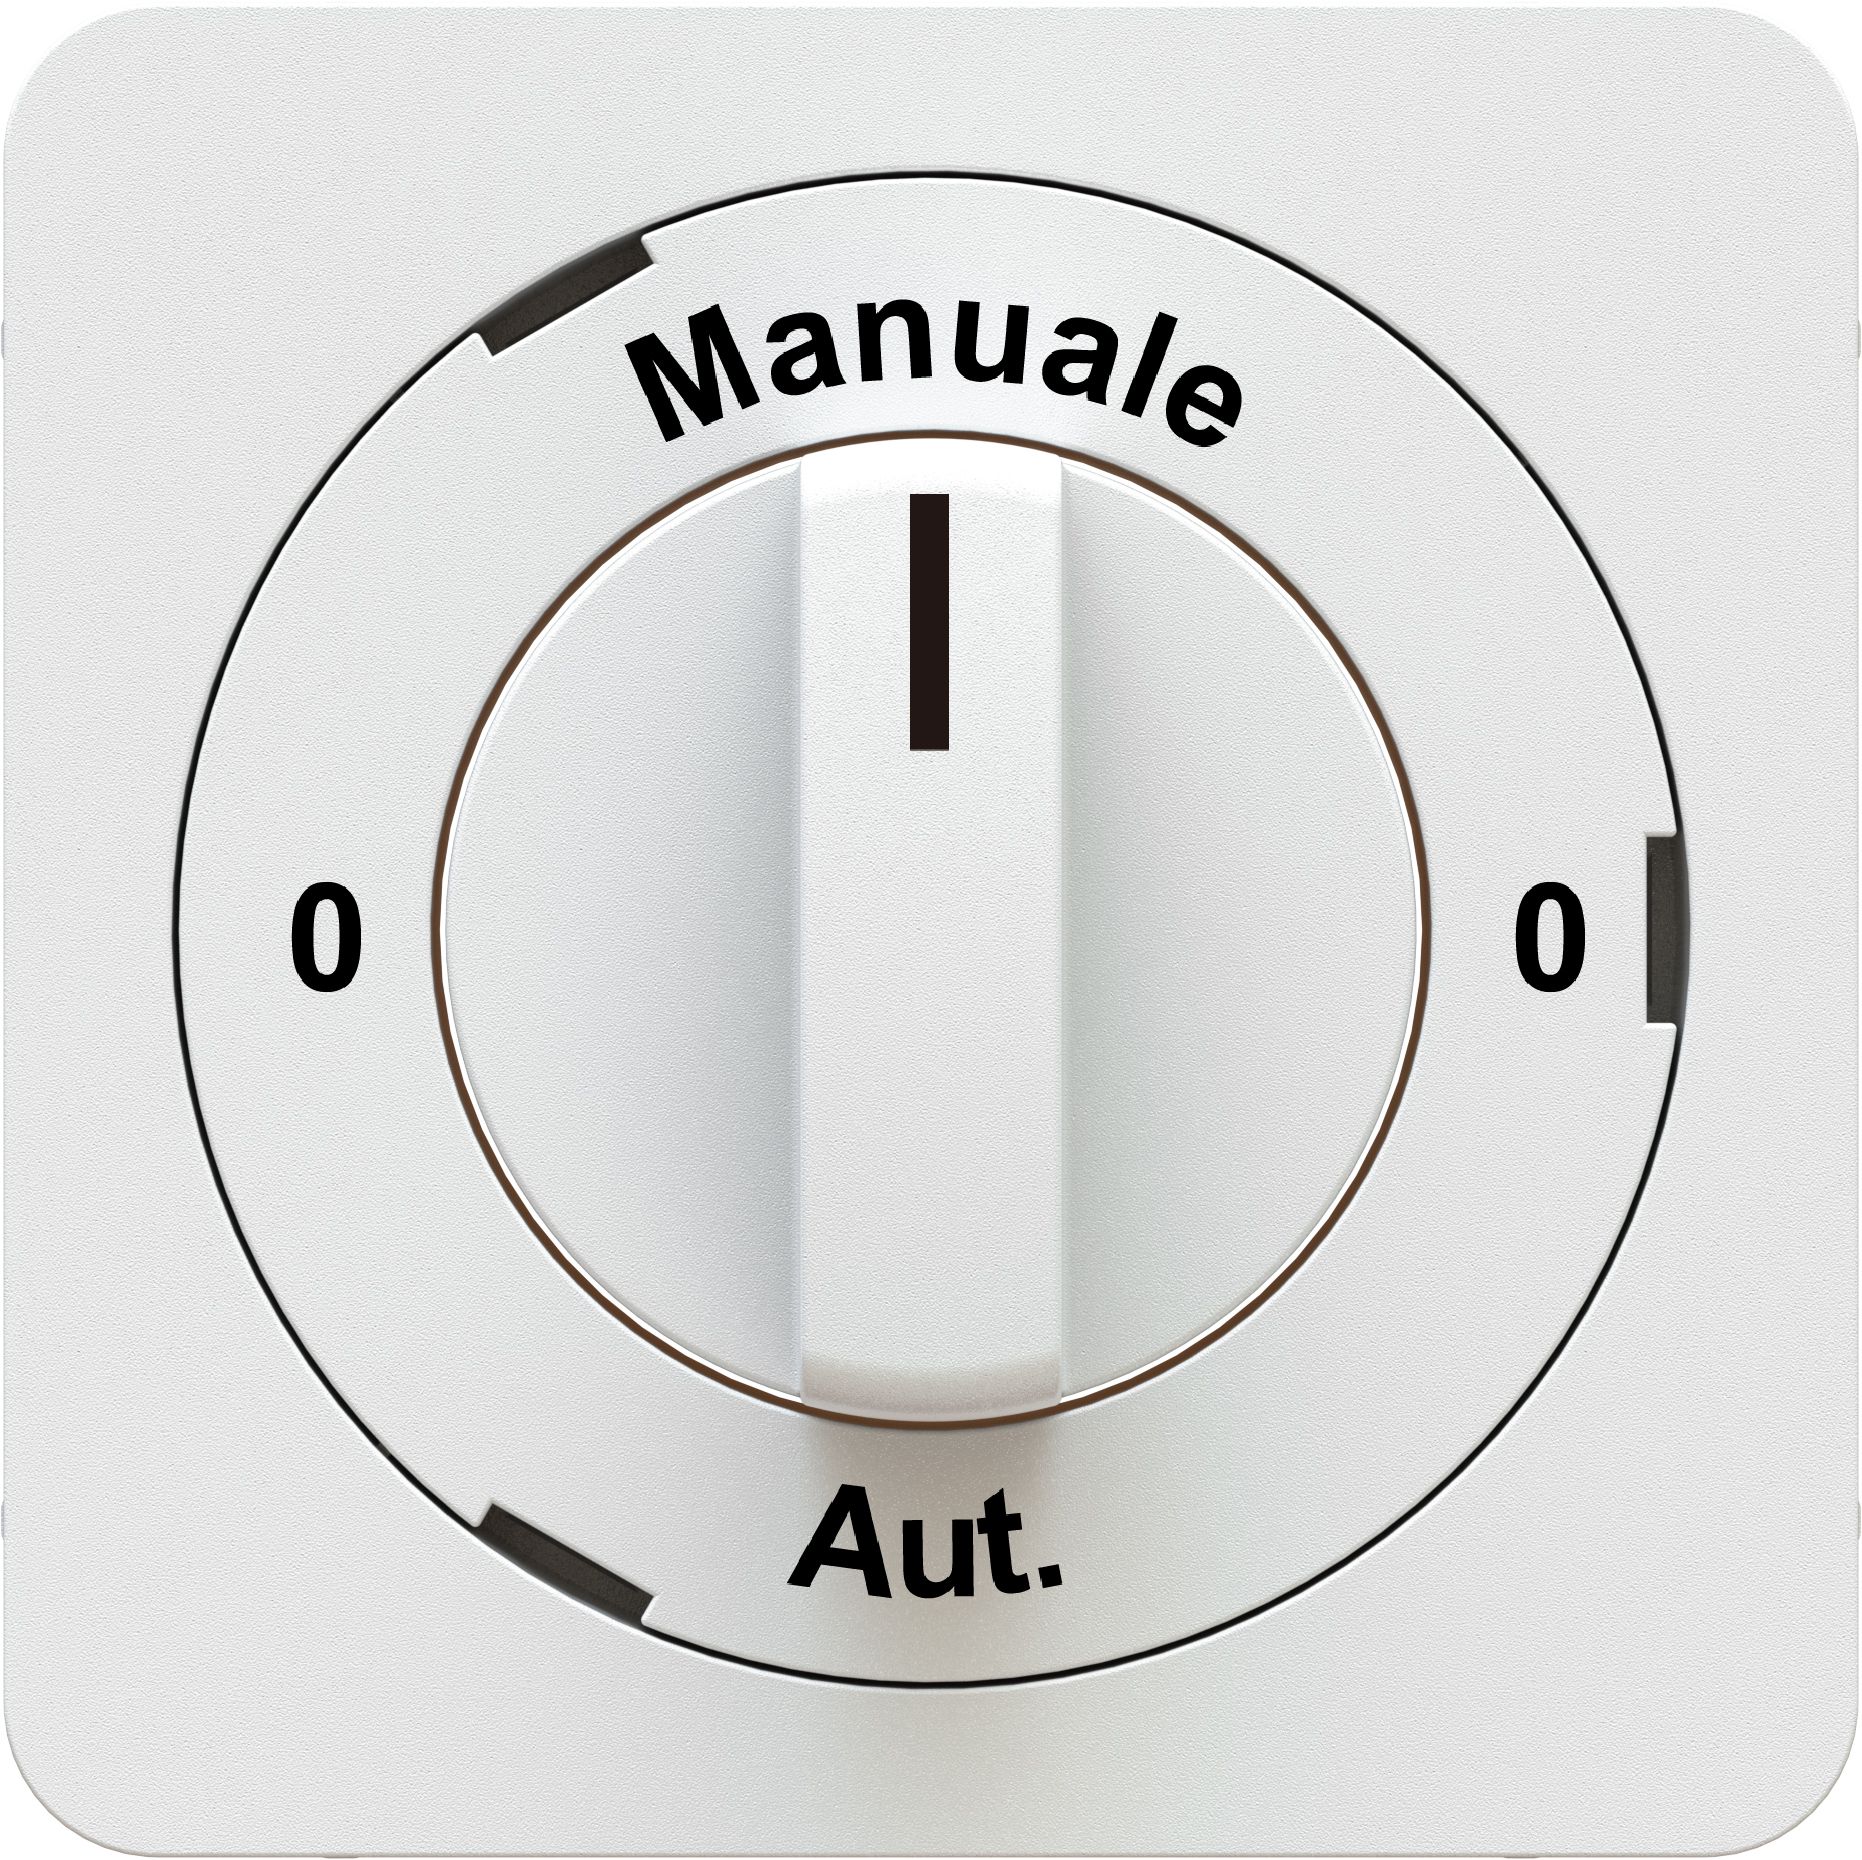 Front plates for turnable switch 0-Manuale-0-Aut.